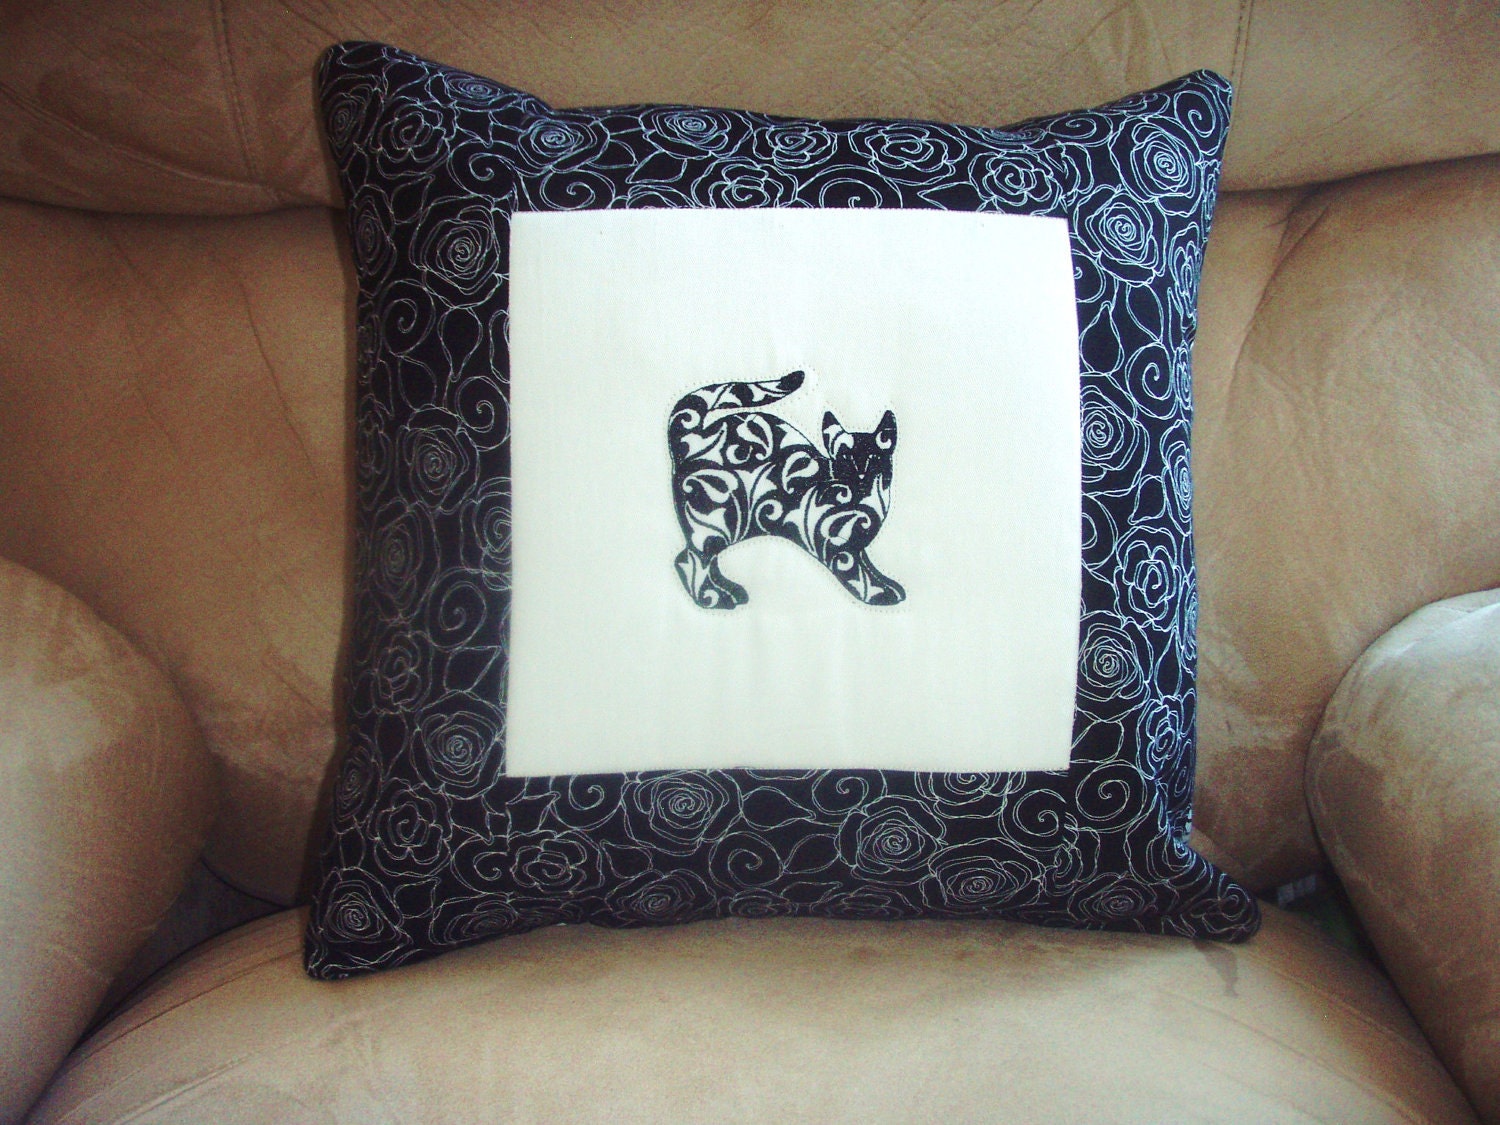 Pillow Cover Damask Cats 1 in White and Black - nhquiltarts